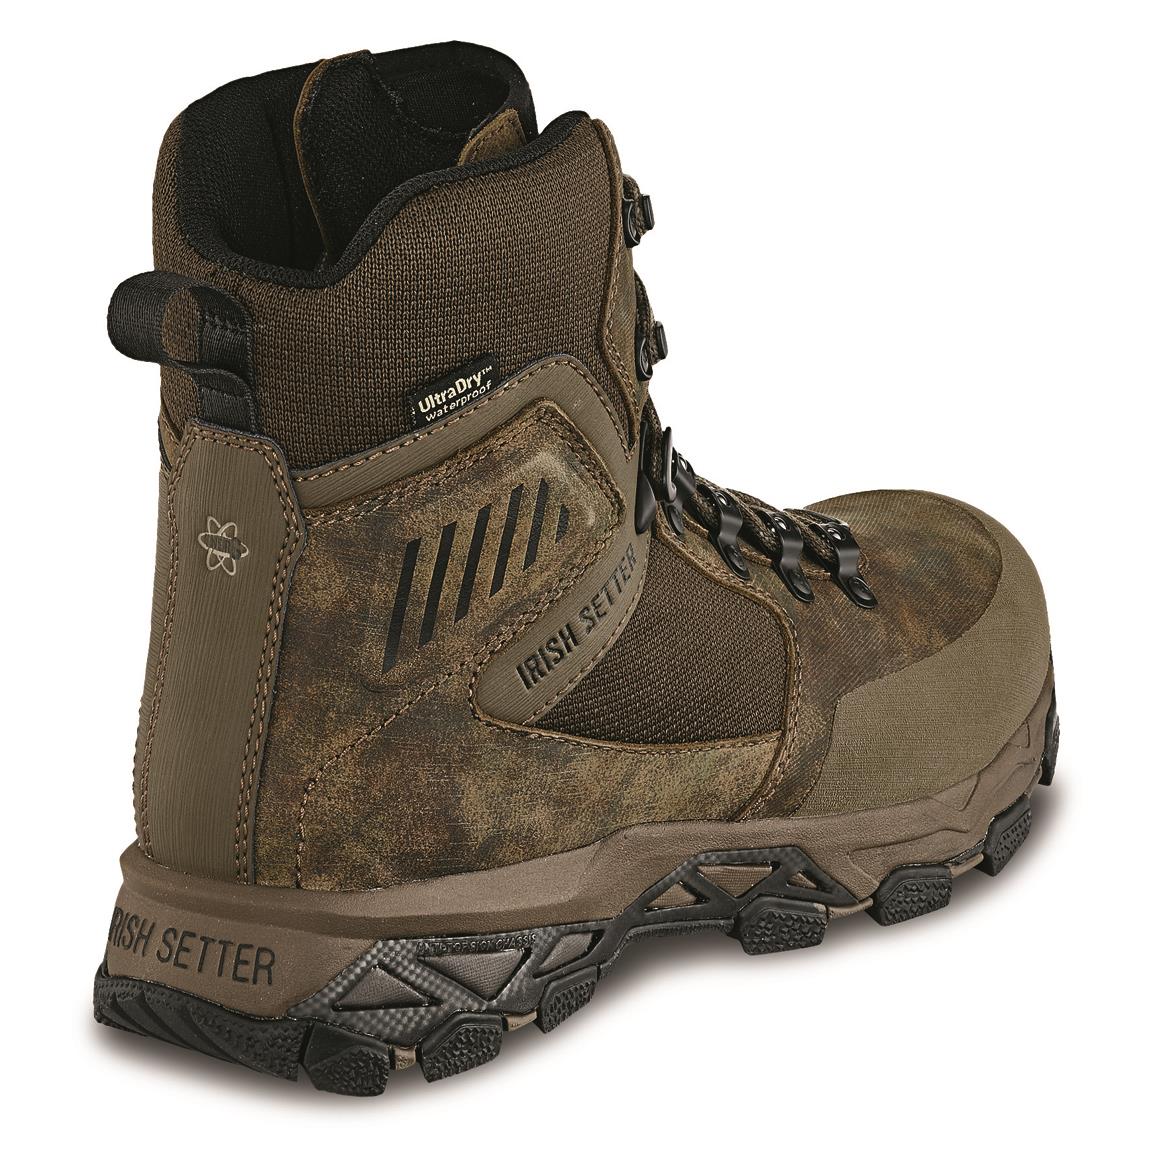 Rocky Sport Utility Max Insulated Waterproof Hunting Boots, 1,000-gram ...